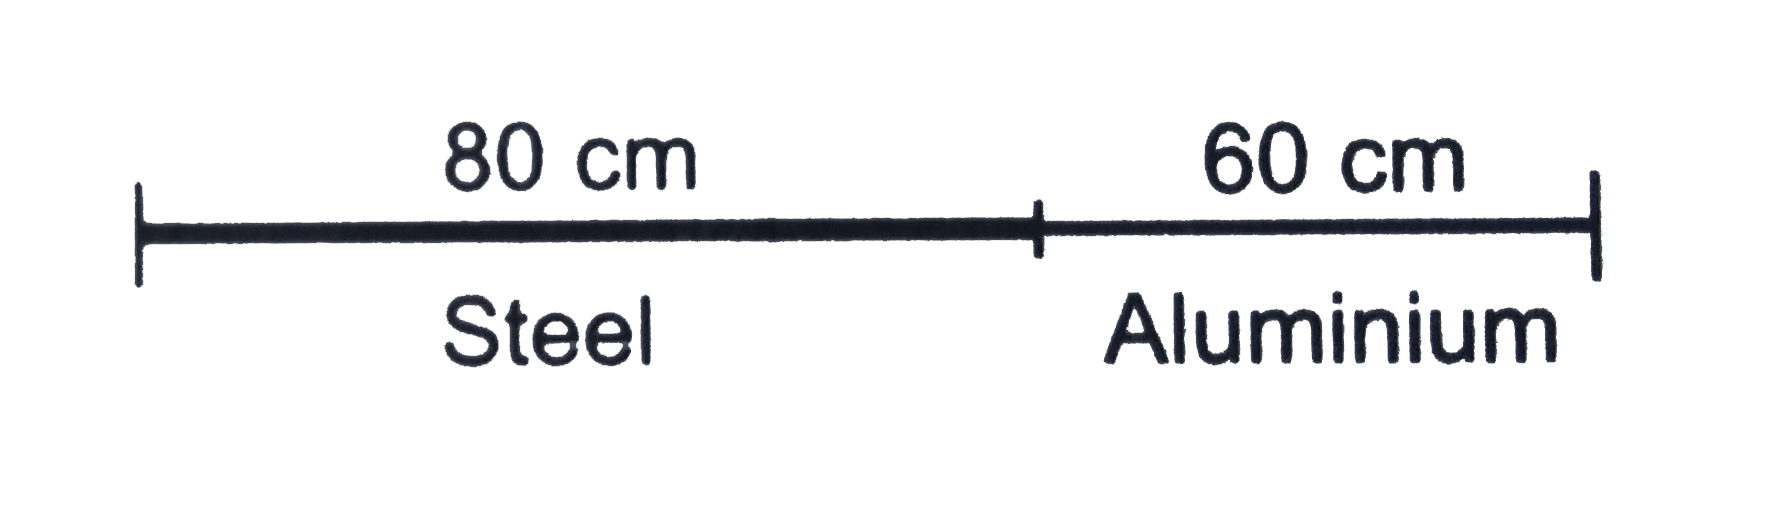 Figure  shows an aluminium wire of length 60 cm joined to a steel wire of length 80 cm and stretched between two fixed supports. The tension produced is 40 N. The cross-sectional area of the steel wire is .1.0 mm^2  and that of the aluminium wire is 3.0 mm 2. What could be the minimum frequency of a tuning fork which can produce standing waves in the system with the joint as a node ? The density of aluminium is 2.6 g cm^-3and that of steel is  7.8gcm^-3